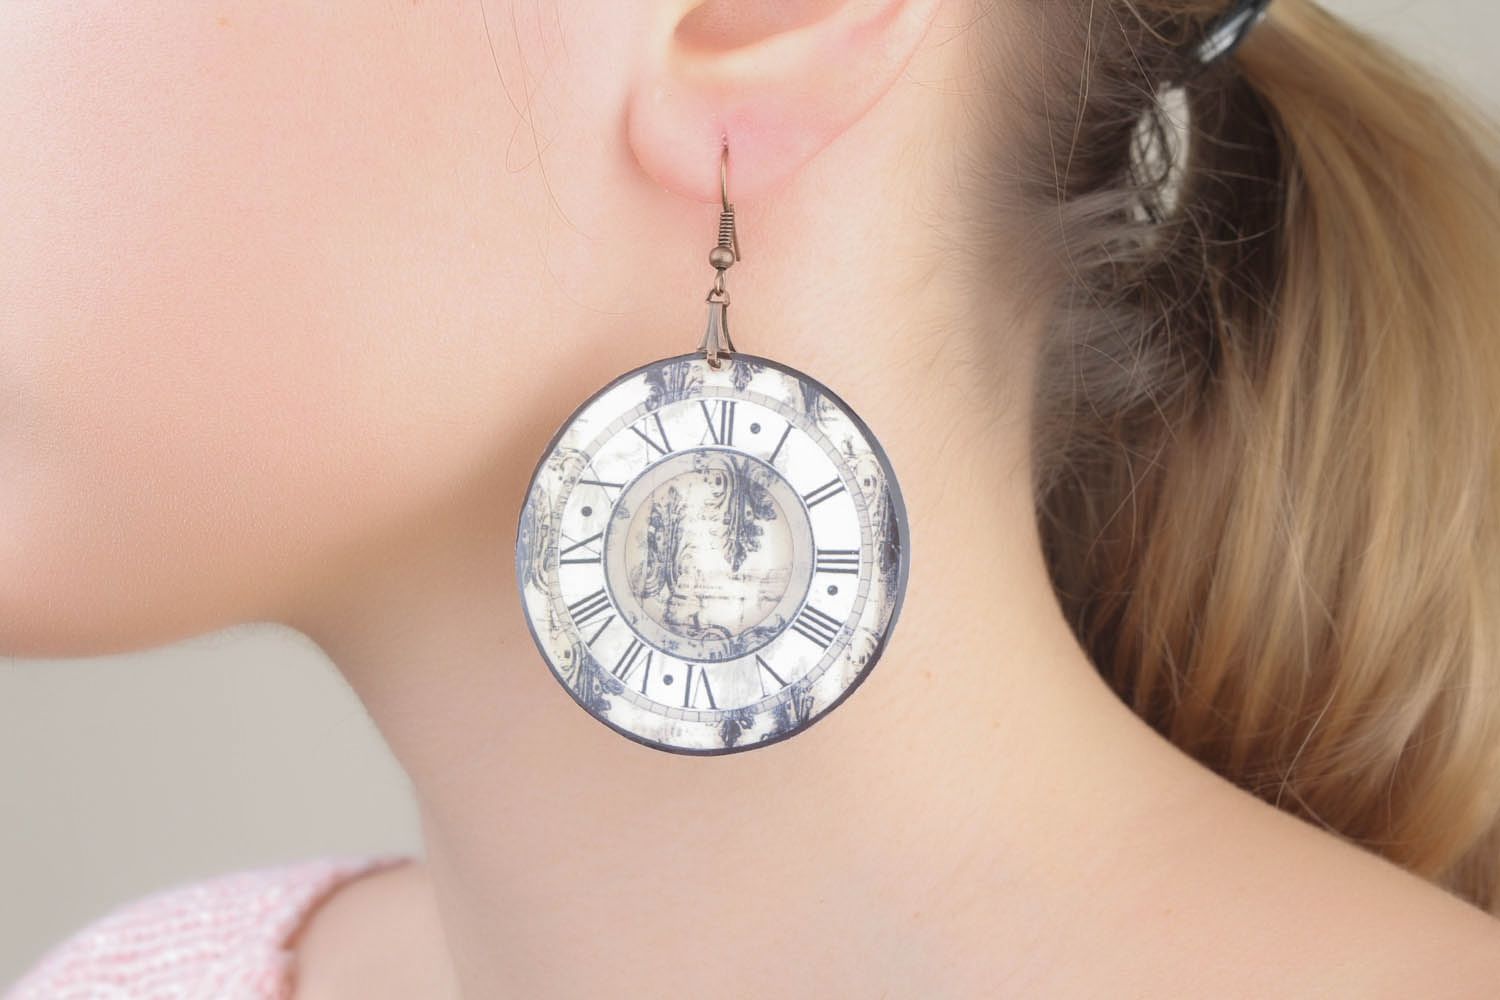 Round earrings in vintage style photo 1